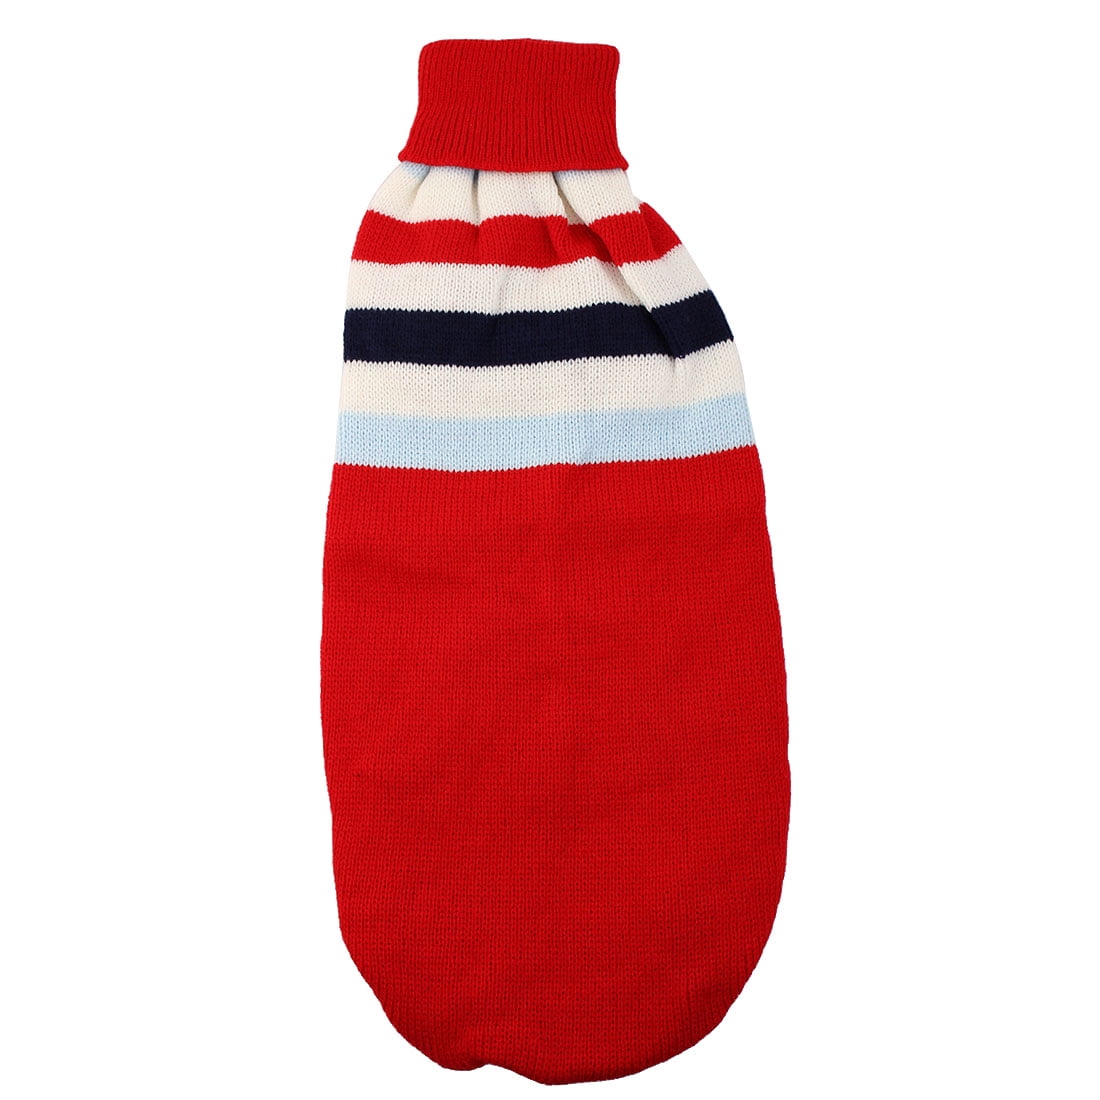 Pet Dog Woolen knitted Sweater Coat Clothes Apparel Costume Red XL - 0